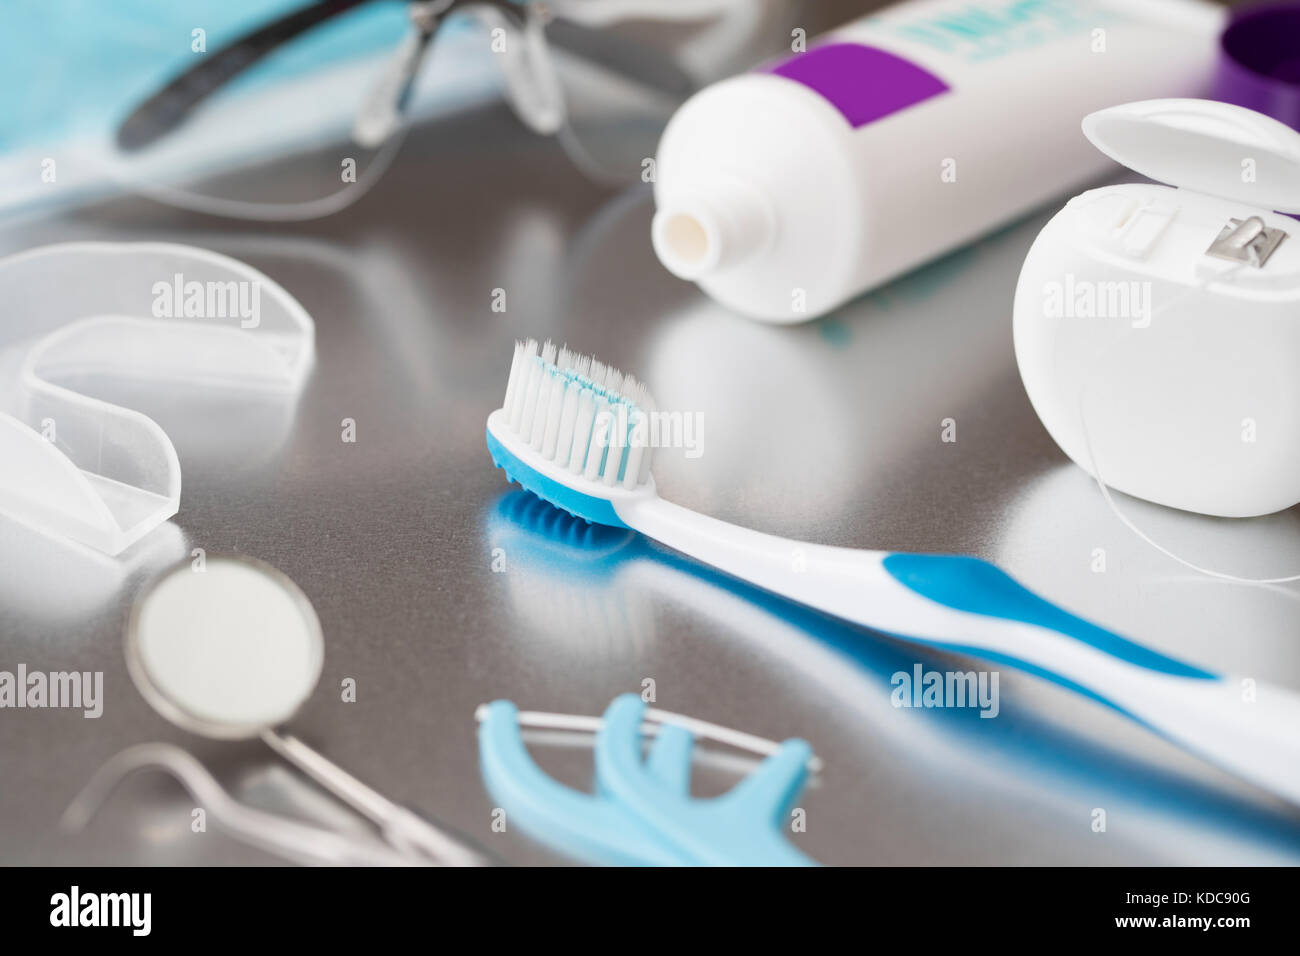 Selection Of Dental Health Treatments And Instruments On Metal Surface Stock Photo